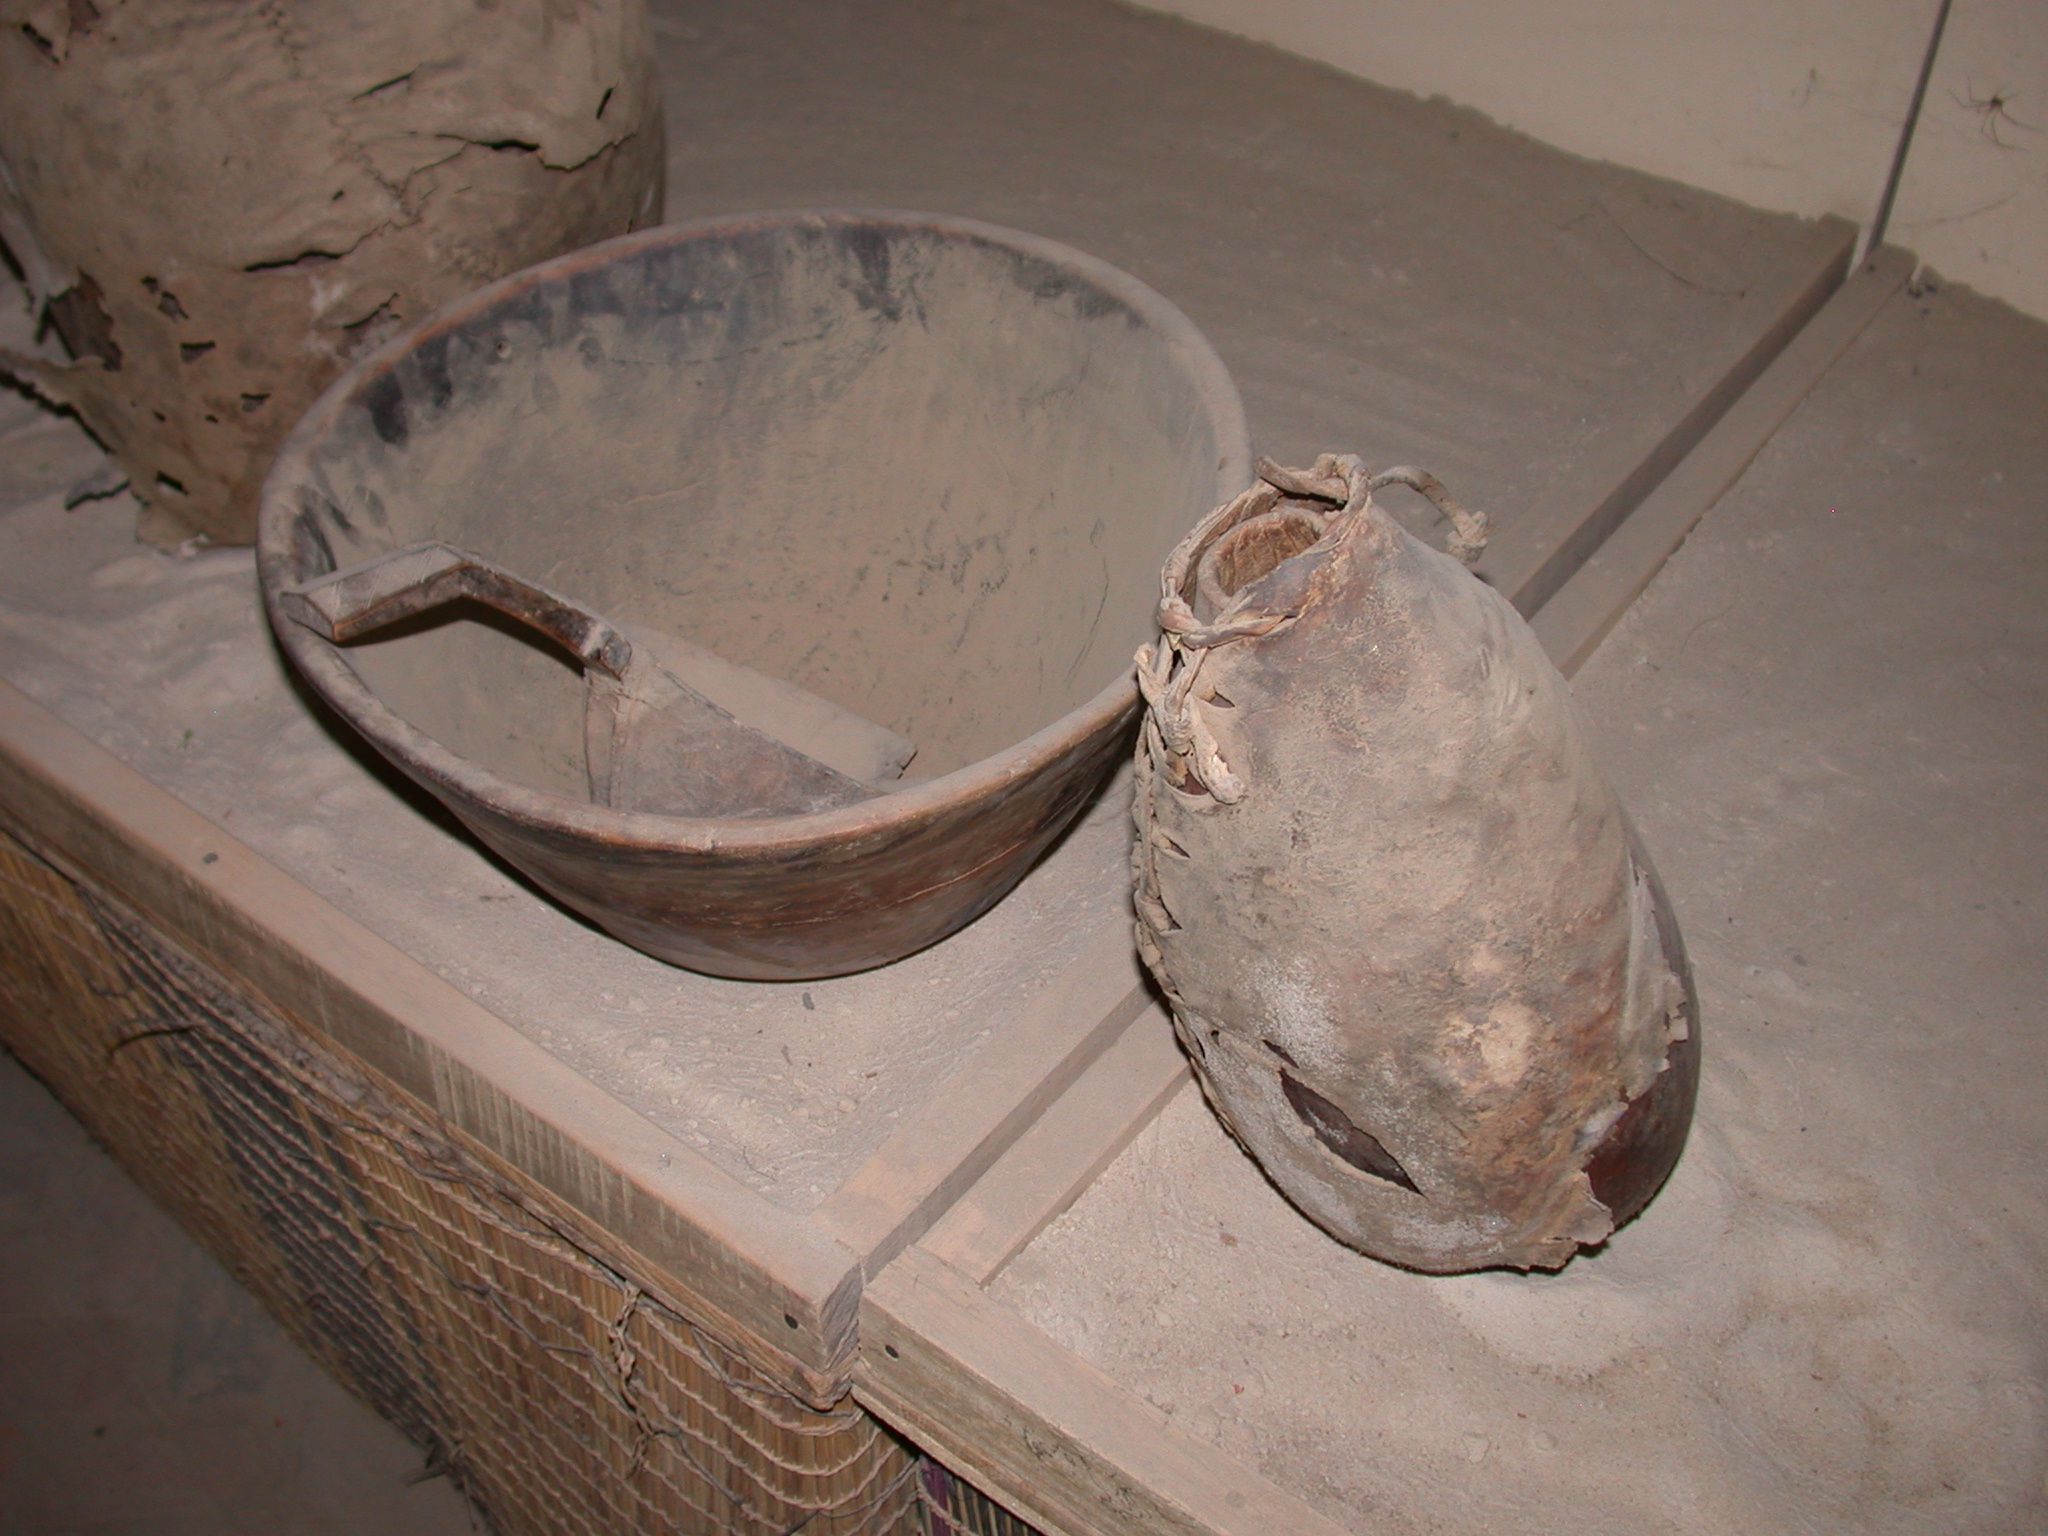 Containers for Milking and Storage of Milk, Bowls, Ladles, Timbuktu Ethnological Museum, Timbuktu, Mali